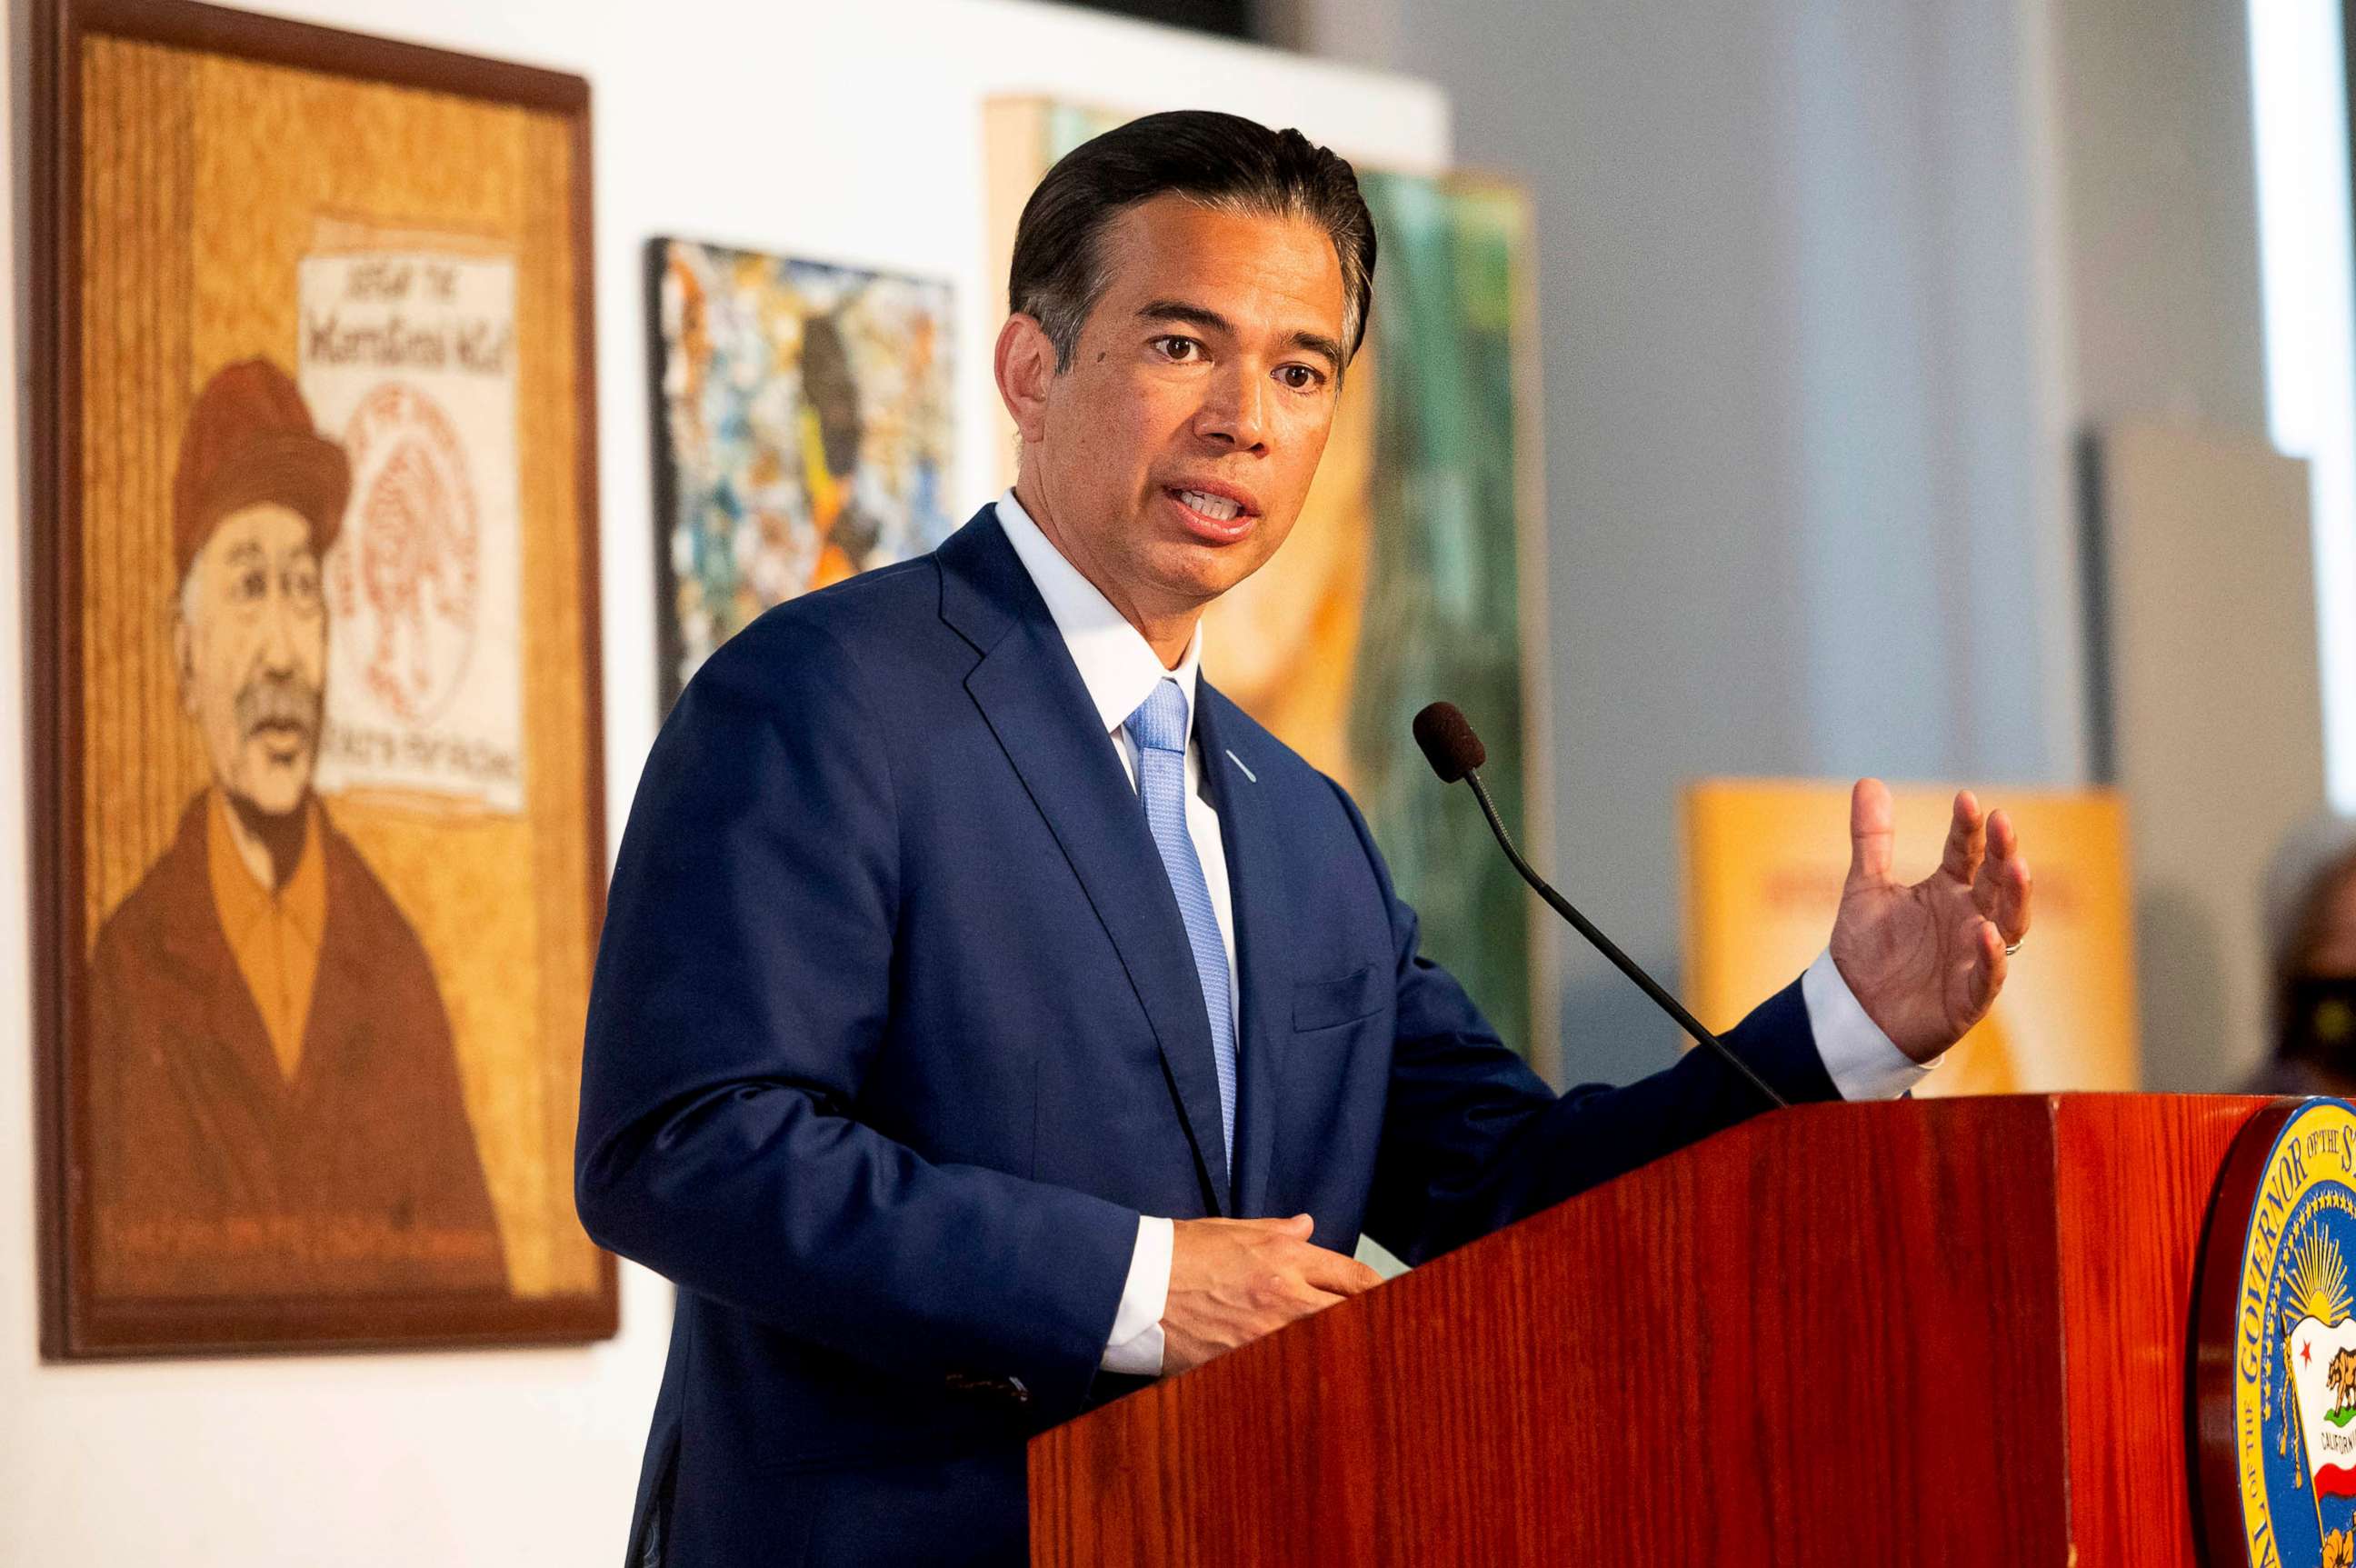 PHOTO: In this March 24, 2021, file photo, California Assemblyman Rob Bonta speaks during a news conference shortly after California Gov. Gavin Newsom announced his nomination for state's attorney general in San Francisco.